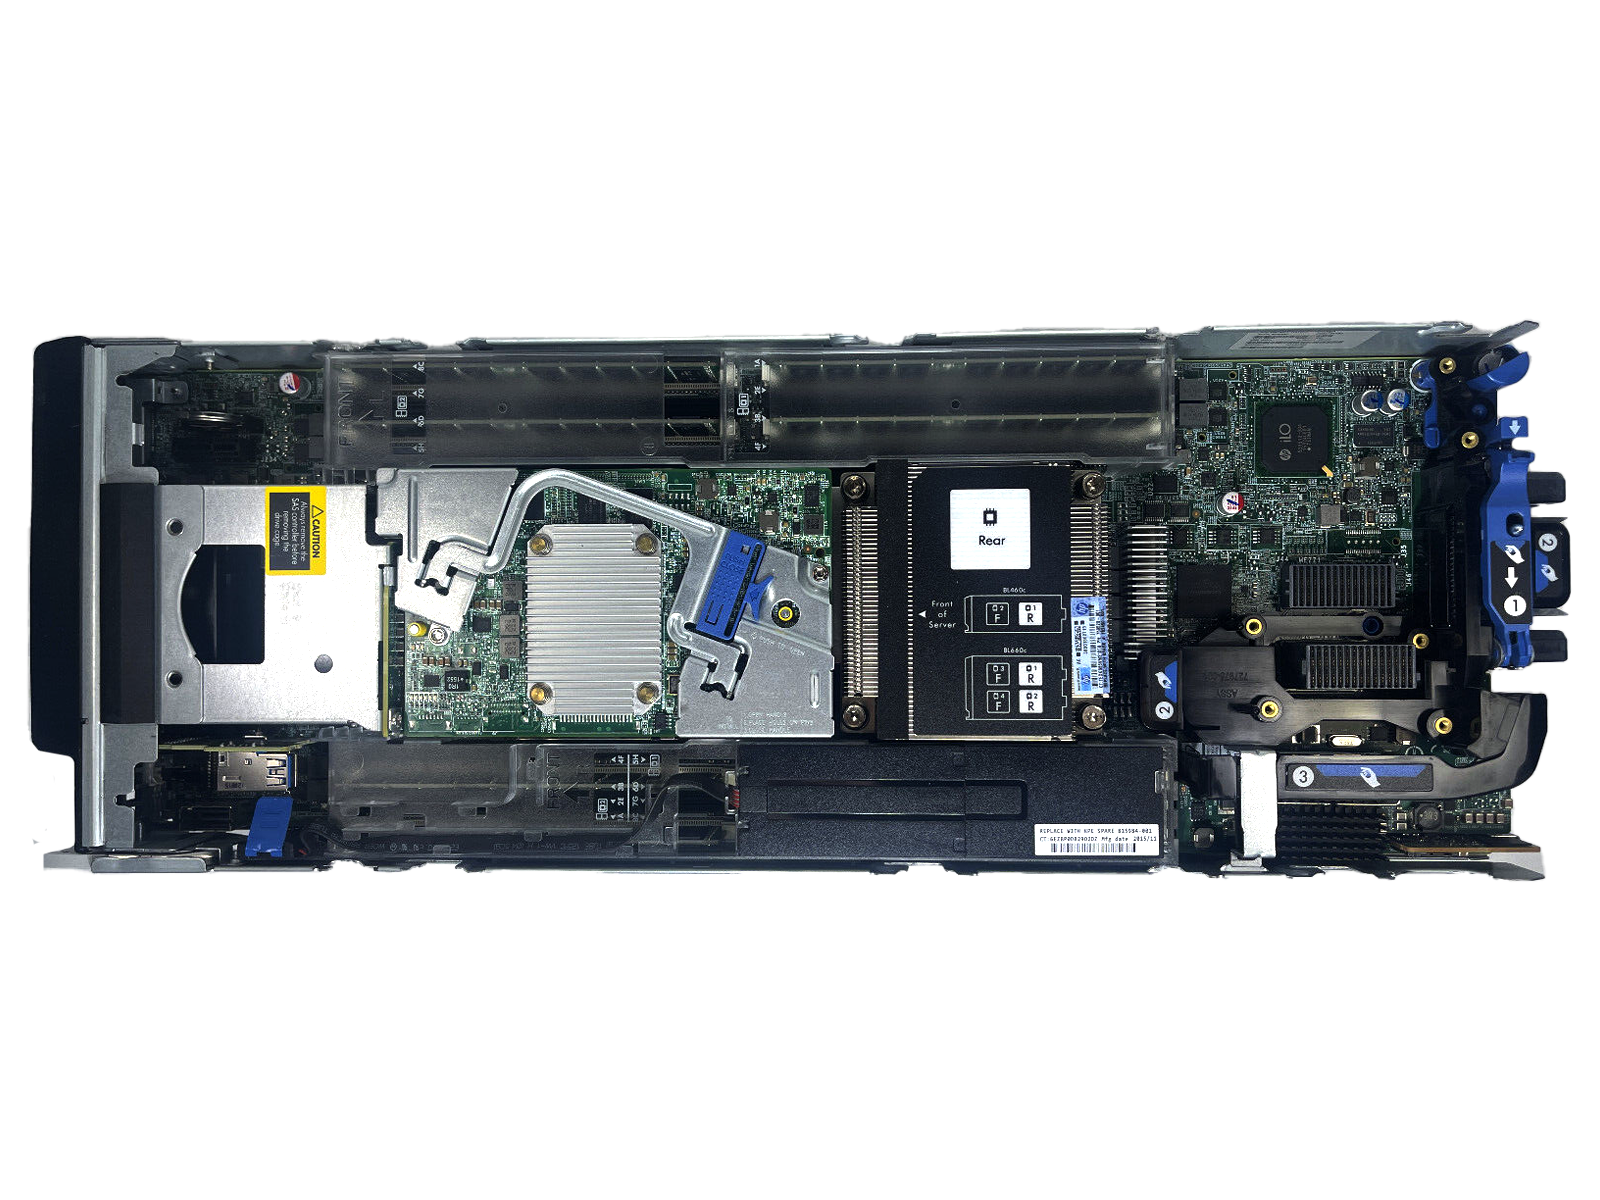 HPE 727021-B21 BL460c Gen9 Blade Server 2SFF 2x E5-2650v3 128GB P244br 630FLB 10GbУ